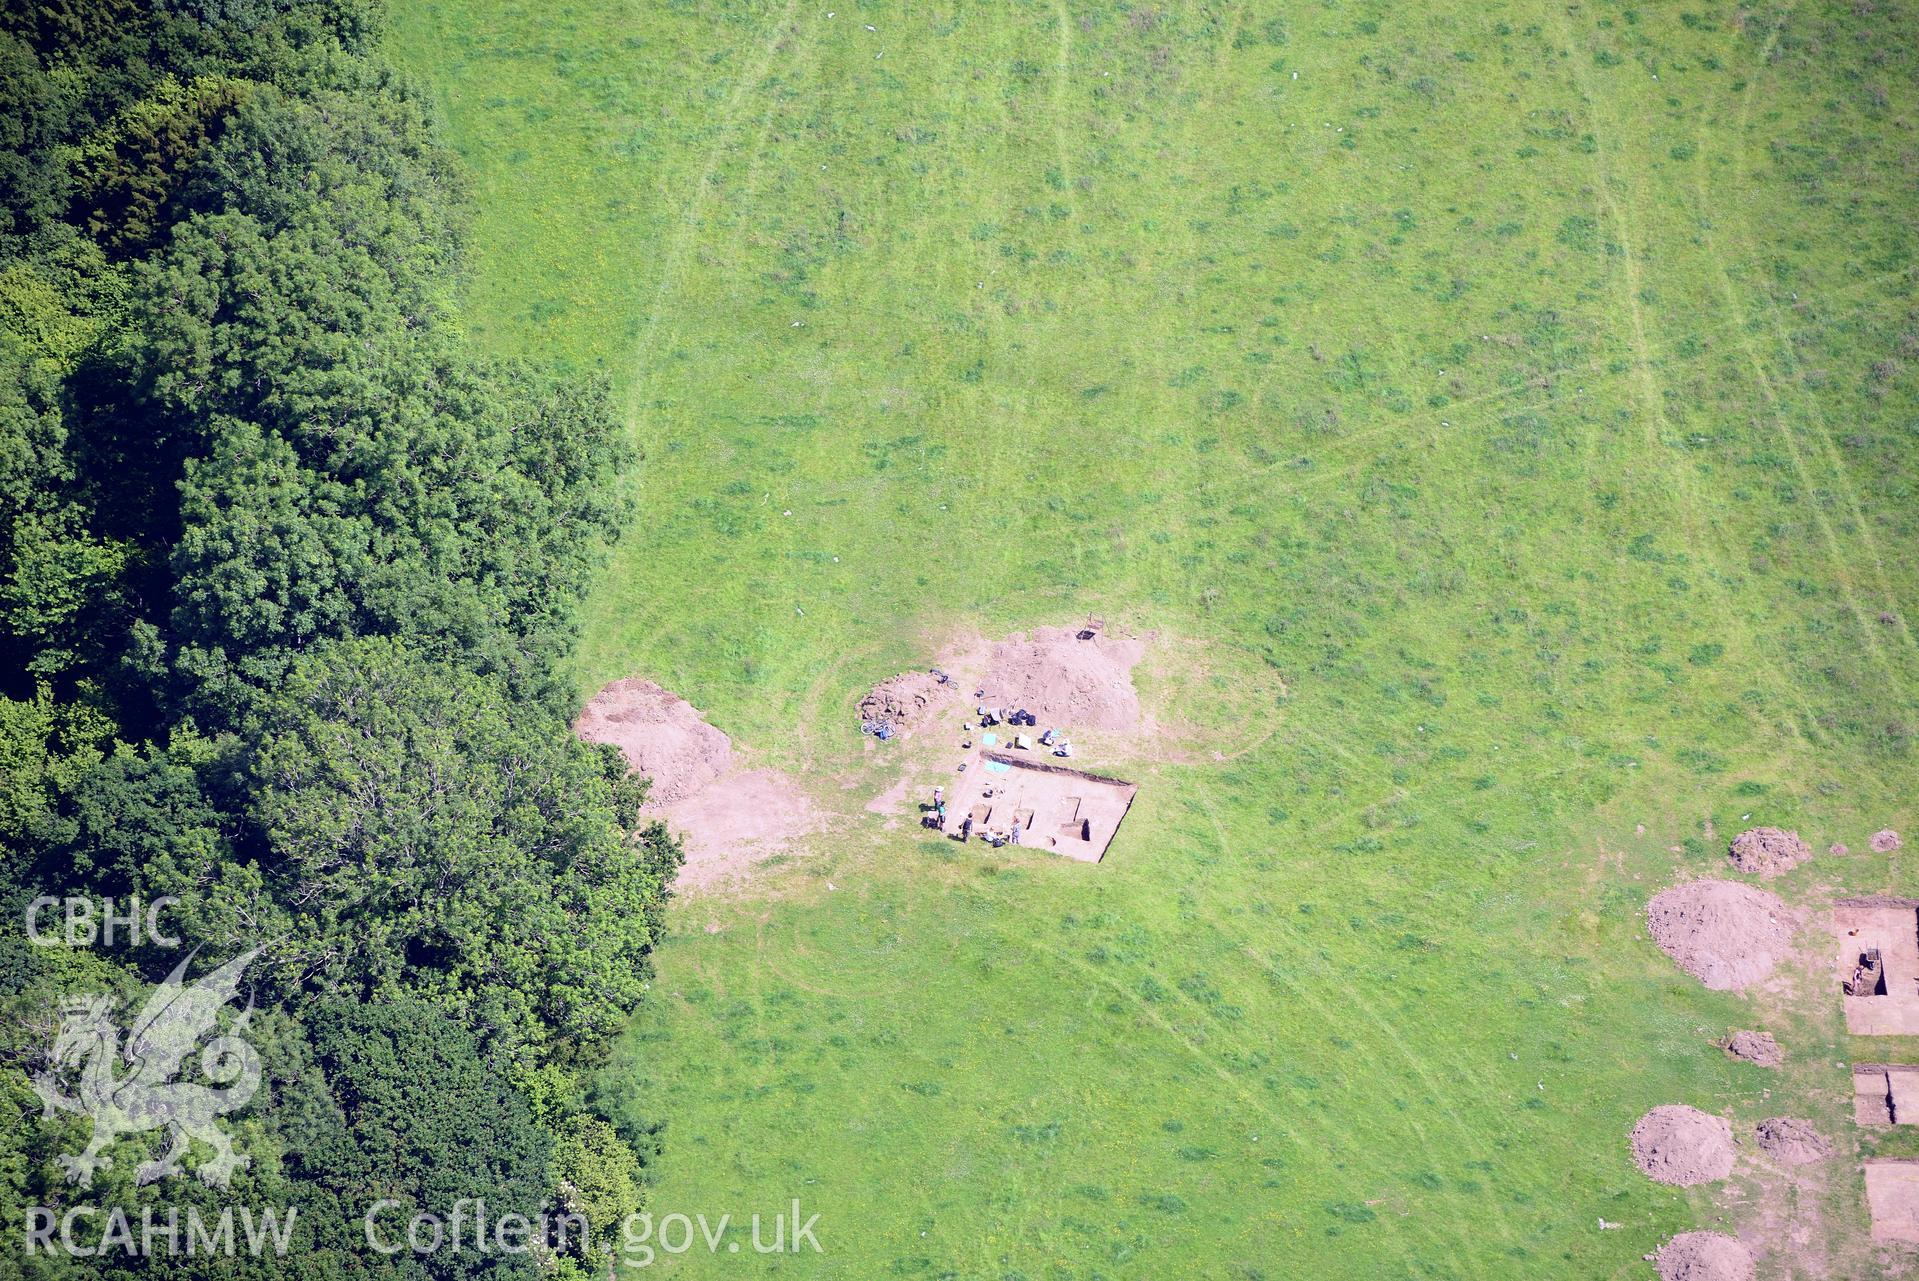 Excavation of Caerau Hillfort, Ely, conducted by Cardiff University. Oblique aerial photograph taken during the Royal Commission's programme of archaeological aerial reconnaissance by Toby Driver on 29th June 2015.